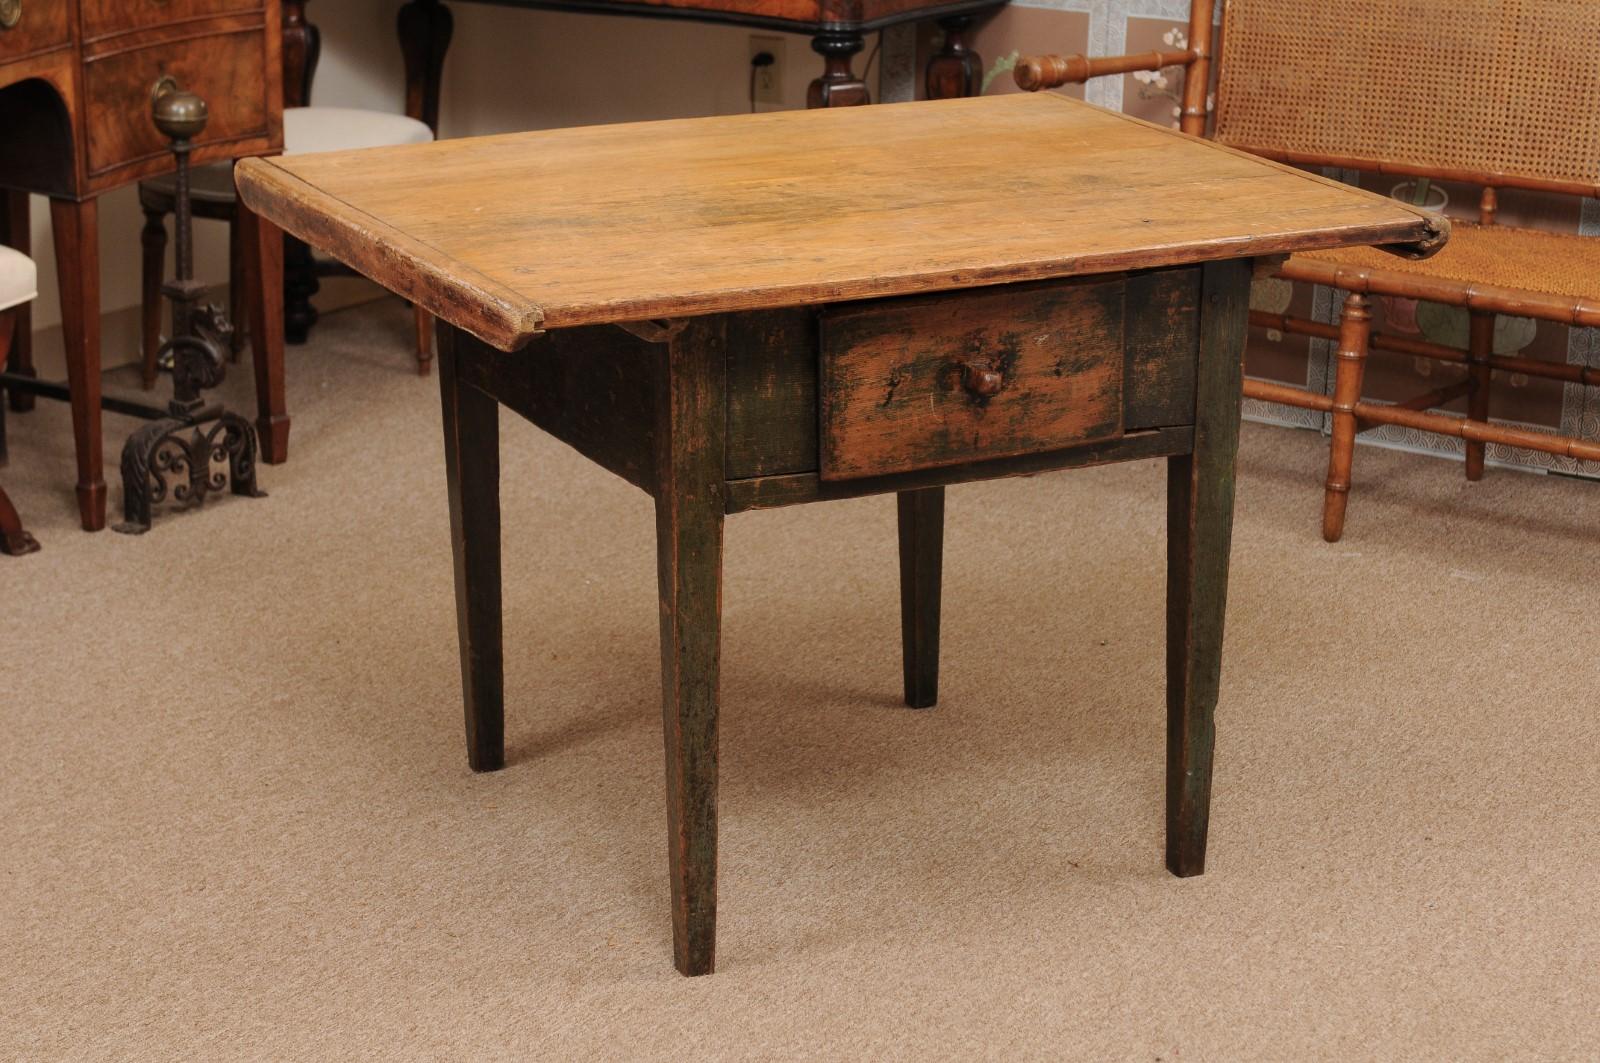 19th century painted kitchen table with 1 deep drawer & tapered legs, Southern Italy.